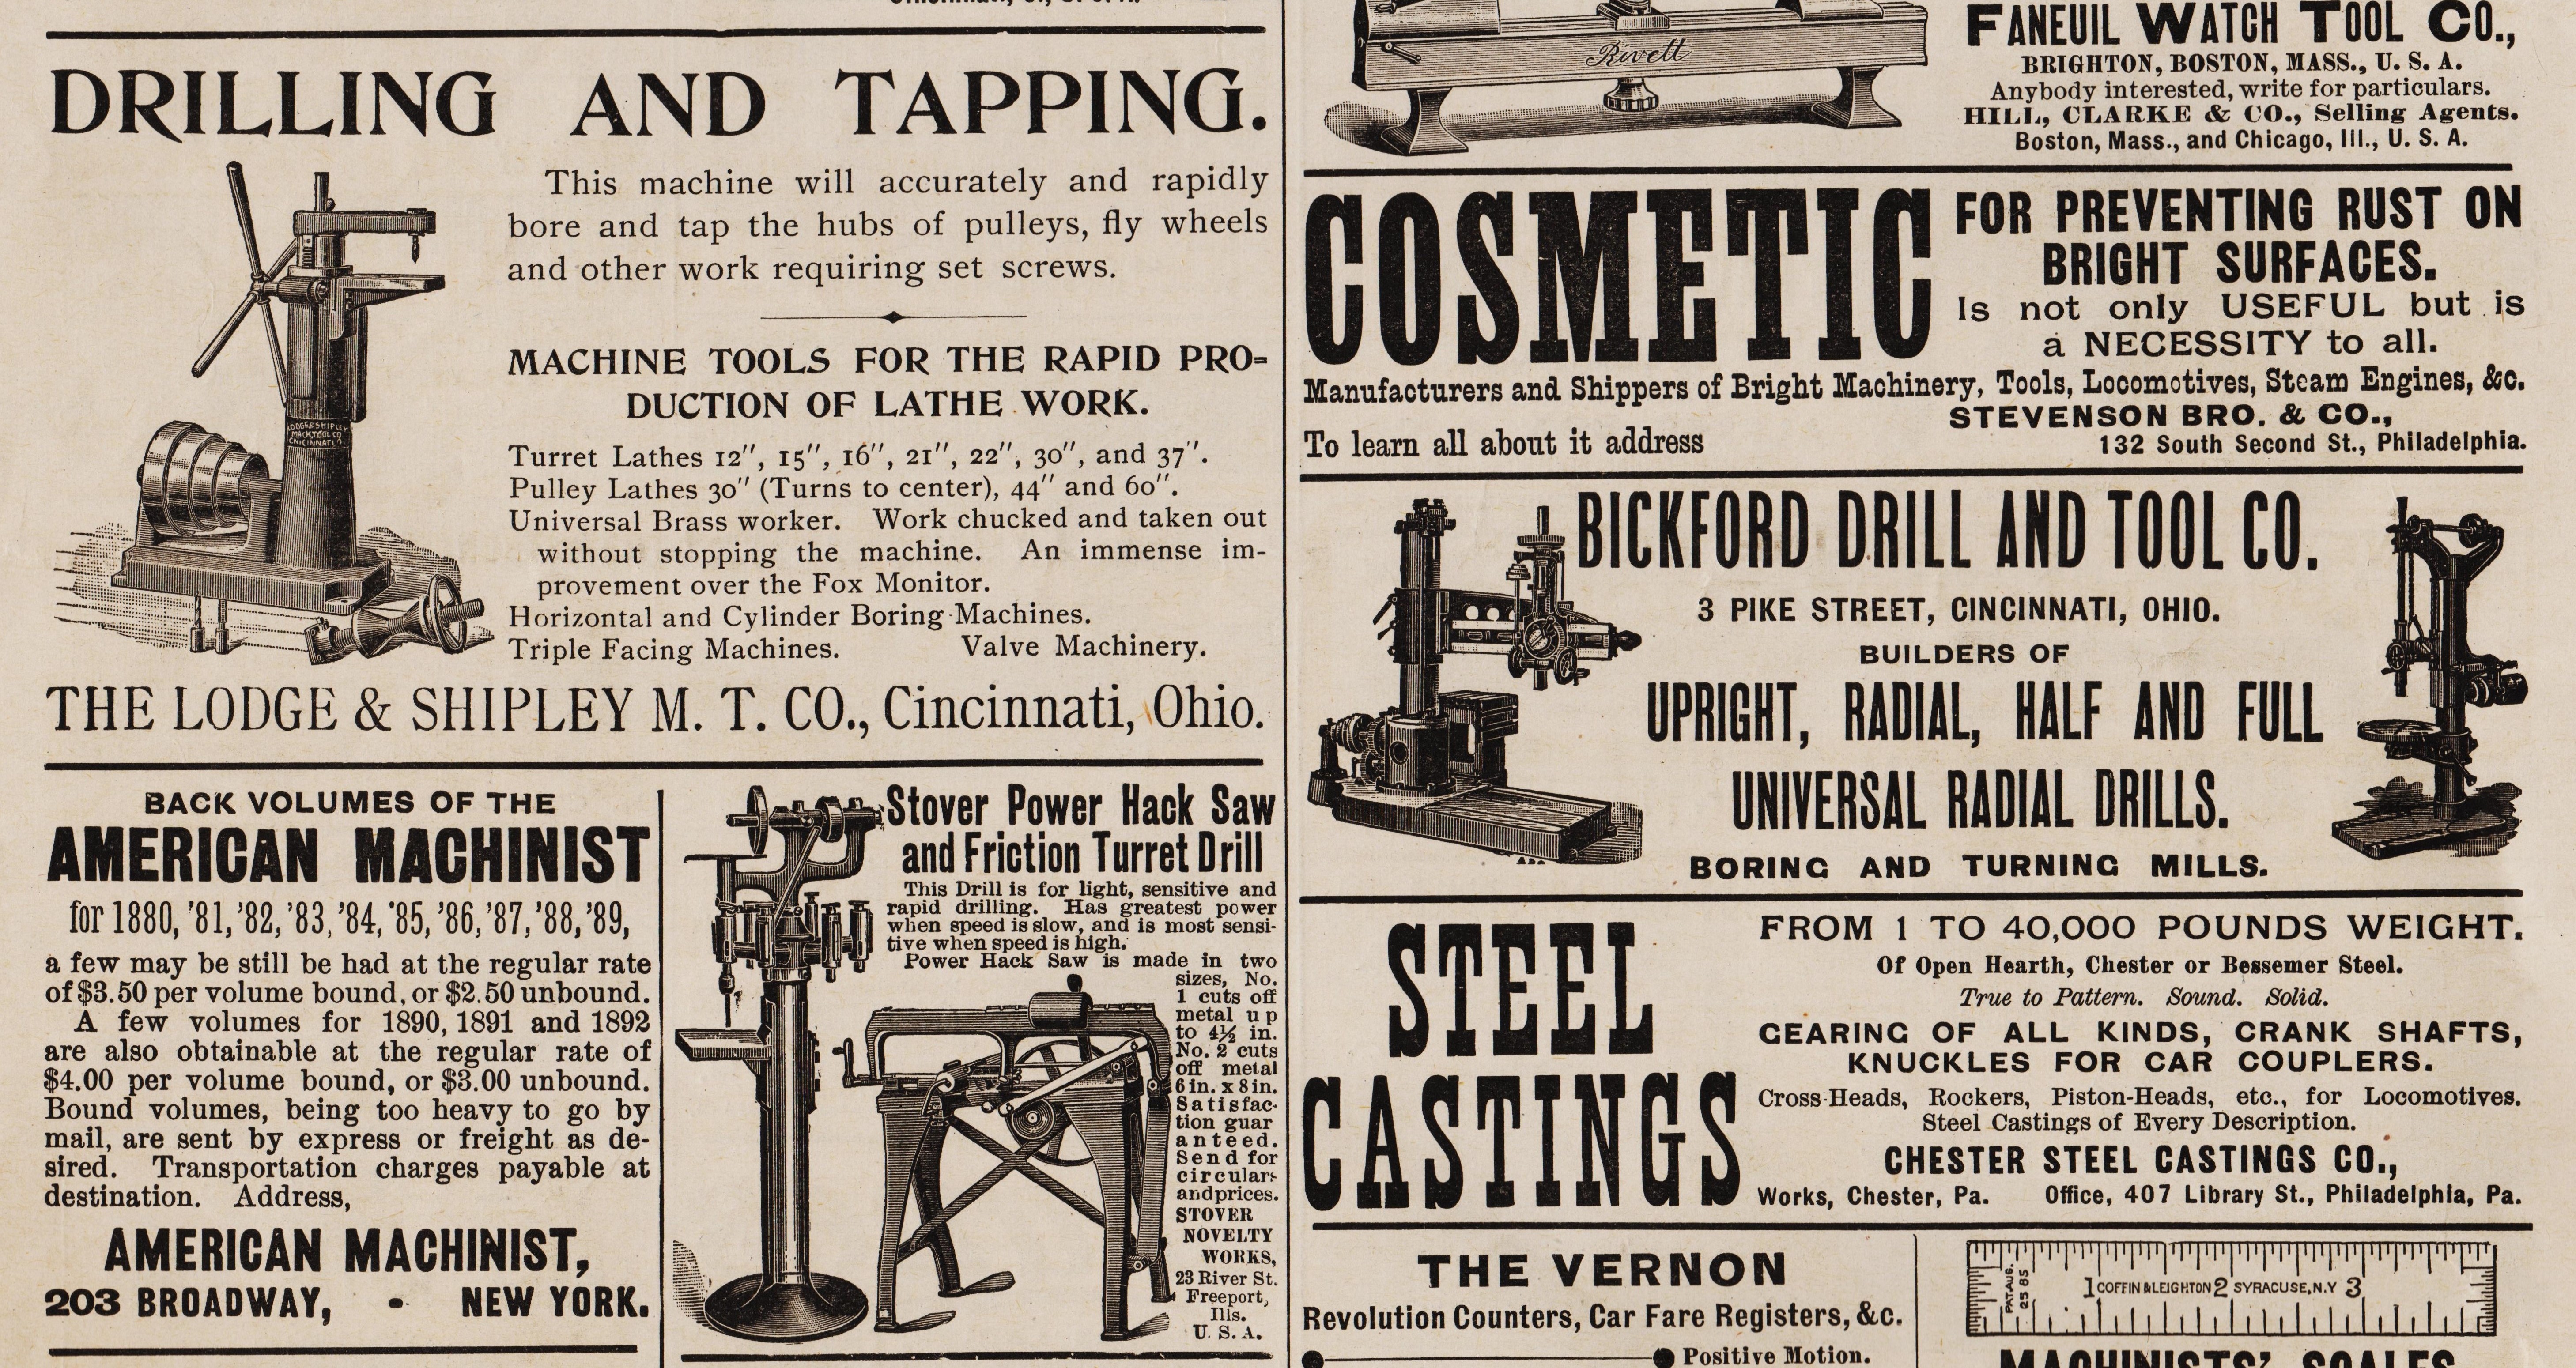 https://antiquemachinery.com/images-2020/American_Machinist-March-15-1894-page-16-mid-Ads.jpg